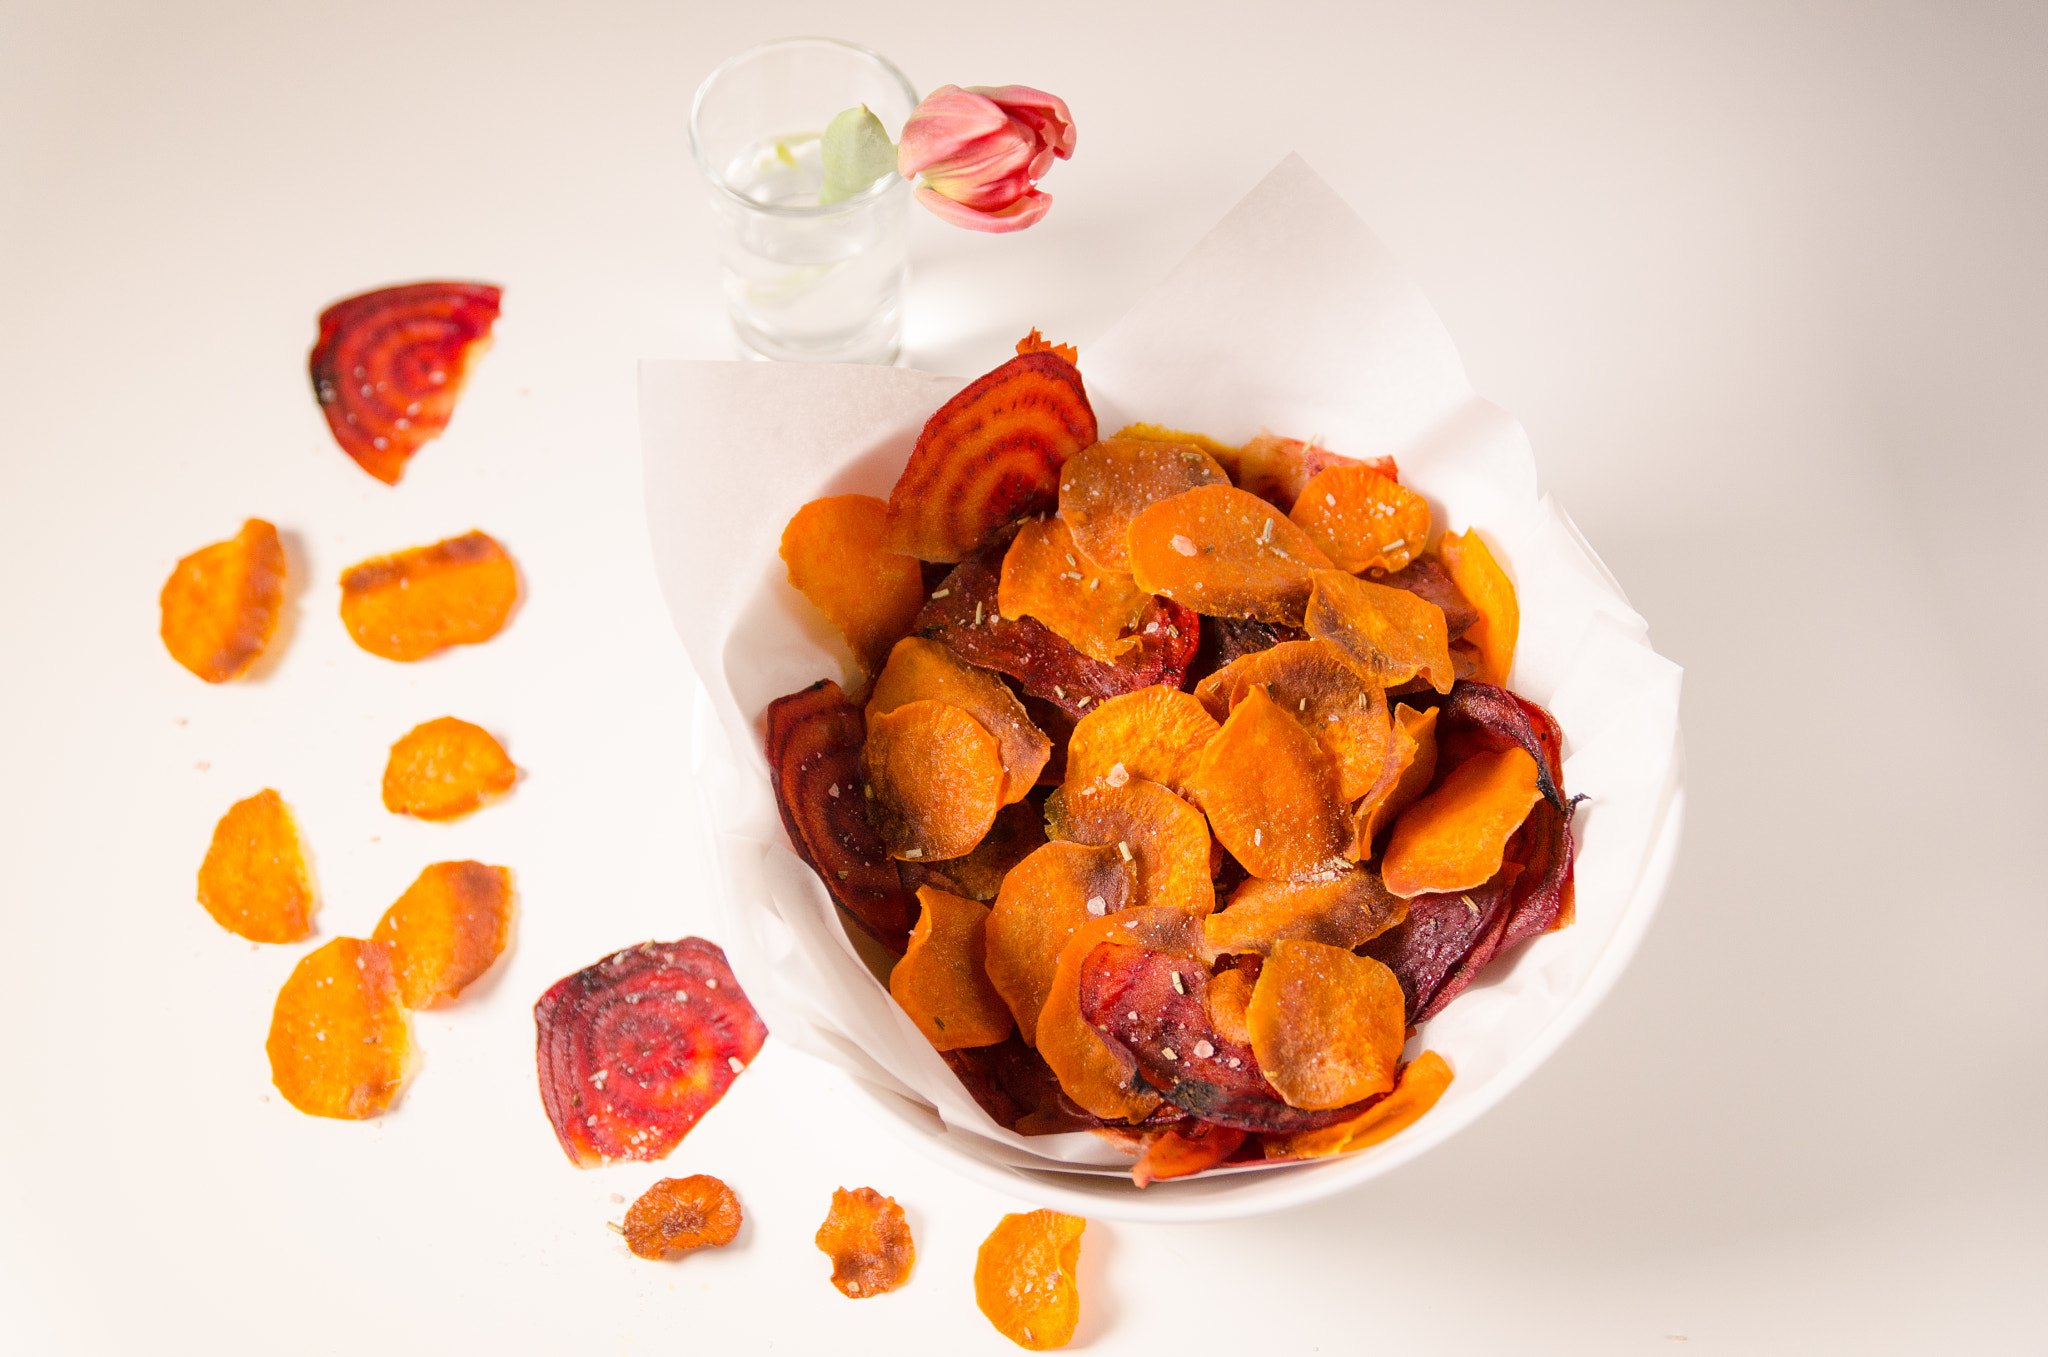 Nikon D7000 sample photo. Healthy vegetable chips photography